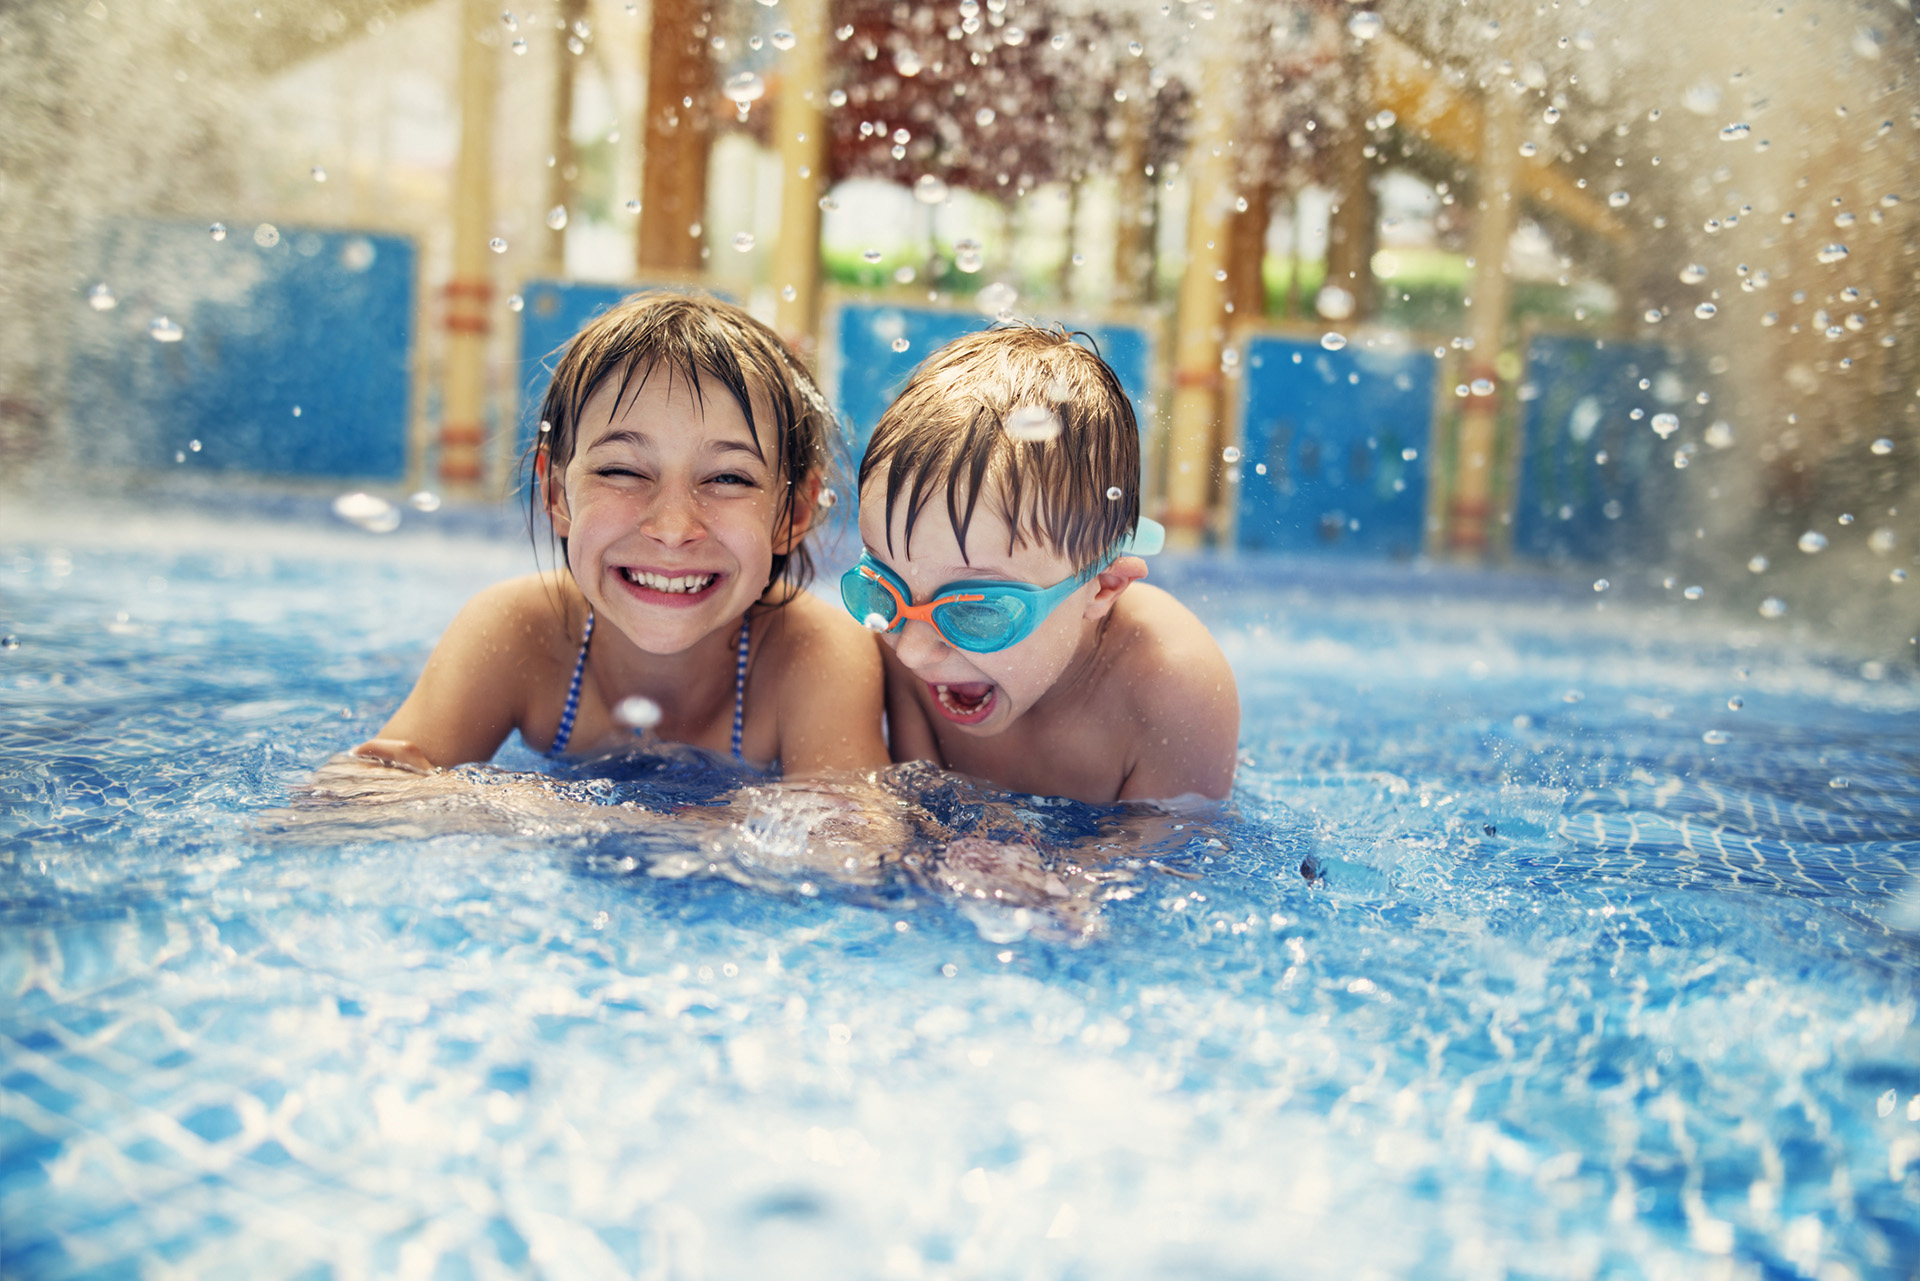 Two children laughing in a swimming pool   